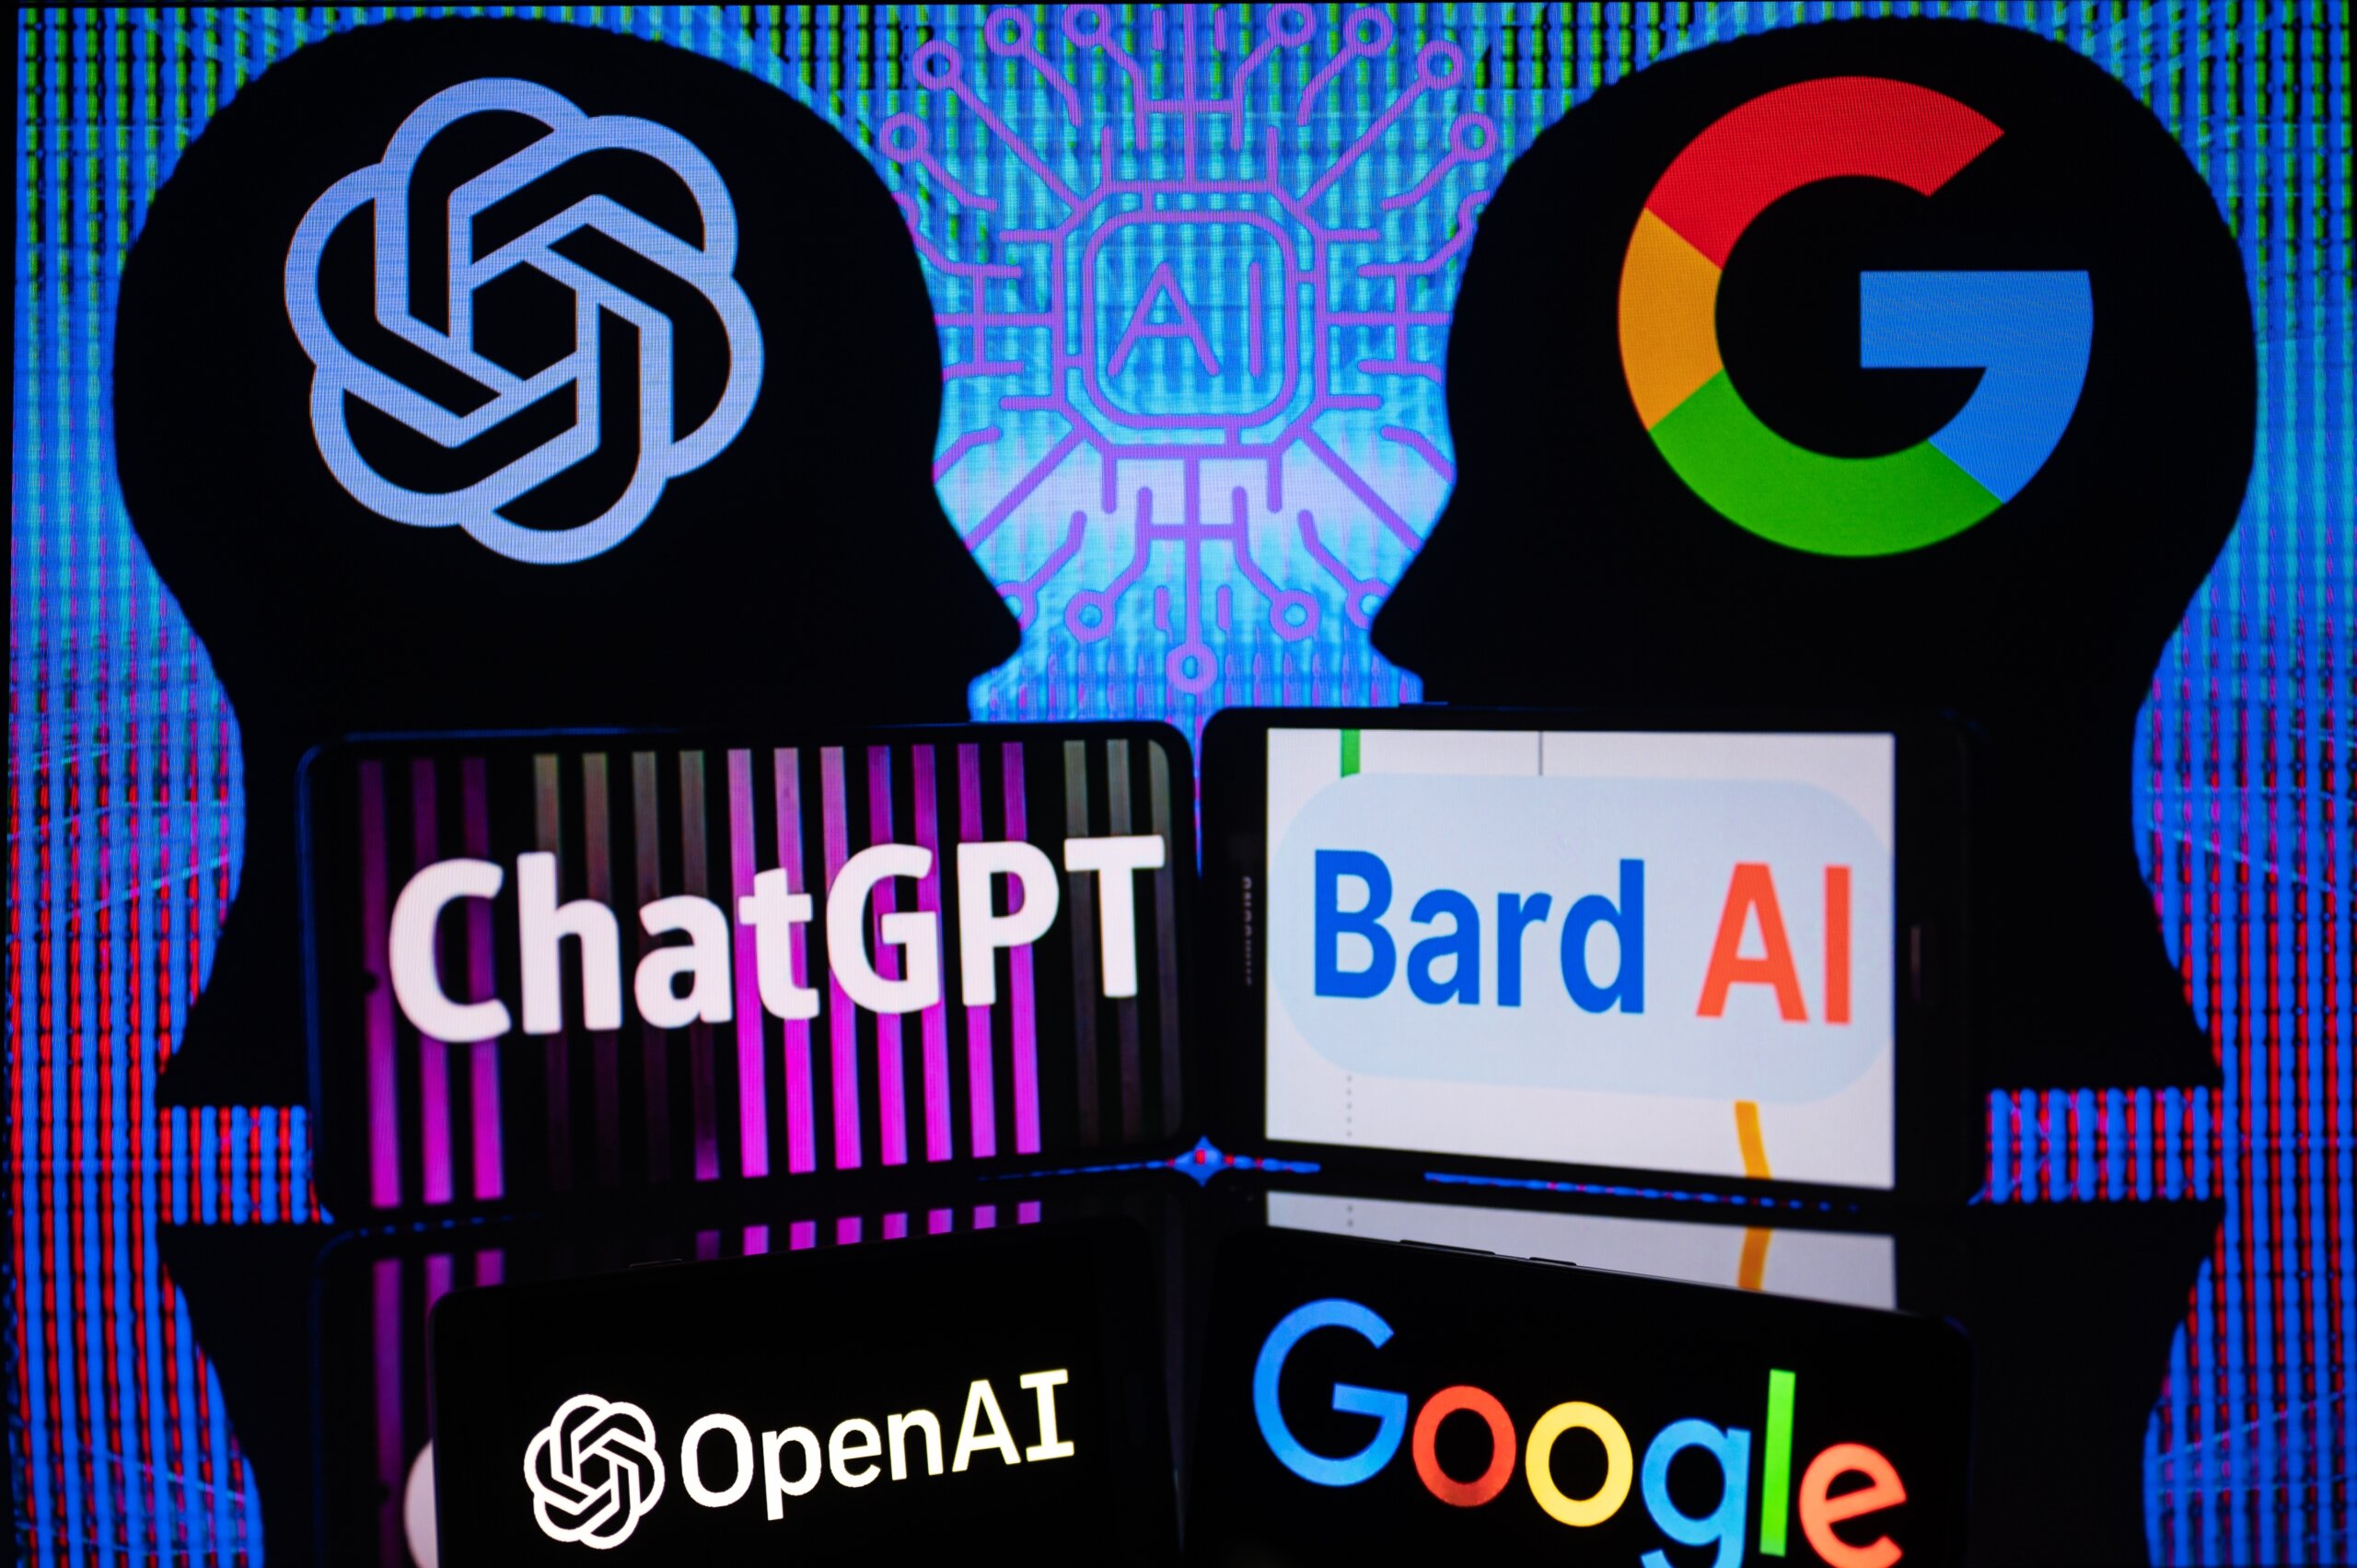 Google Bard is one of the new generation of AI.